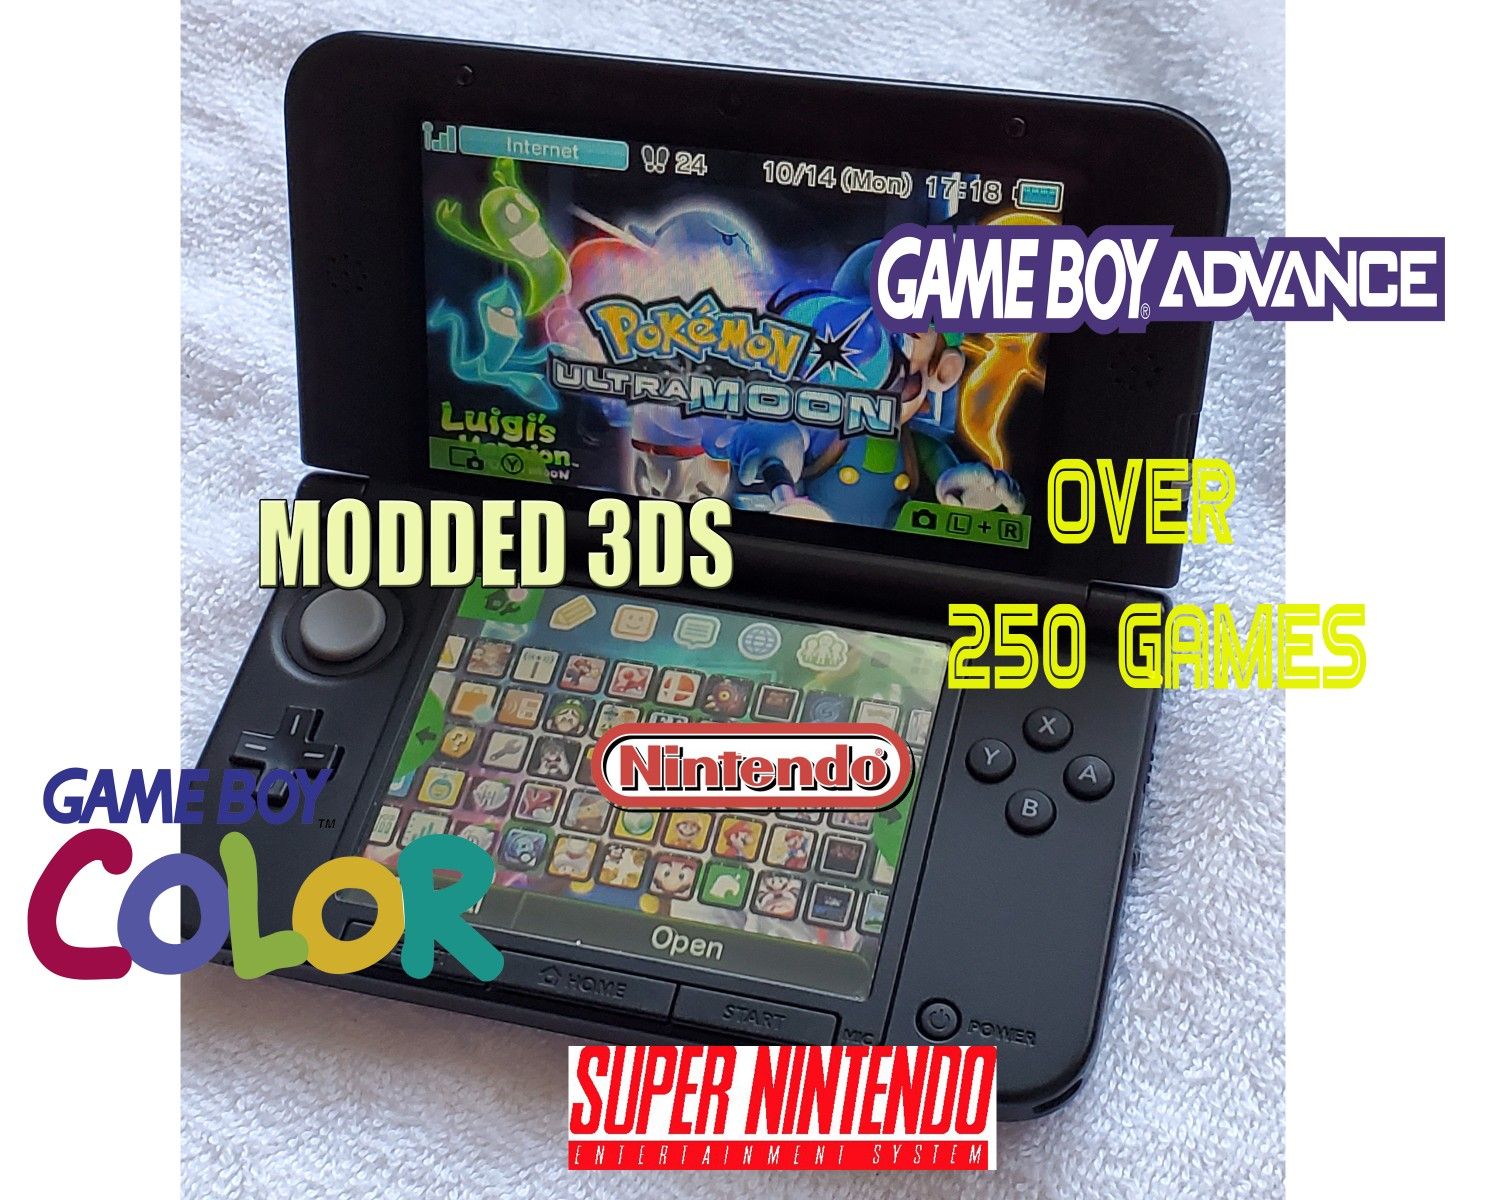 Modded Nintendo 3ds xl with over 250+games